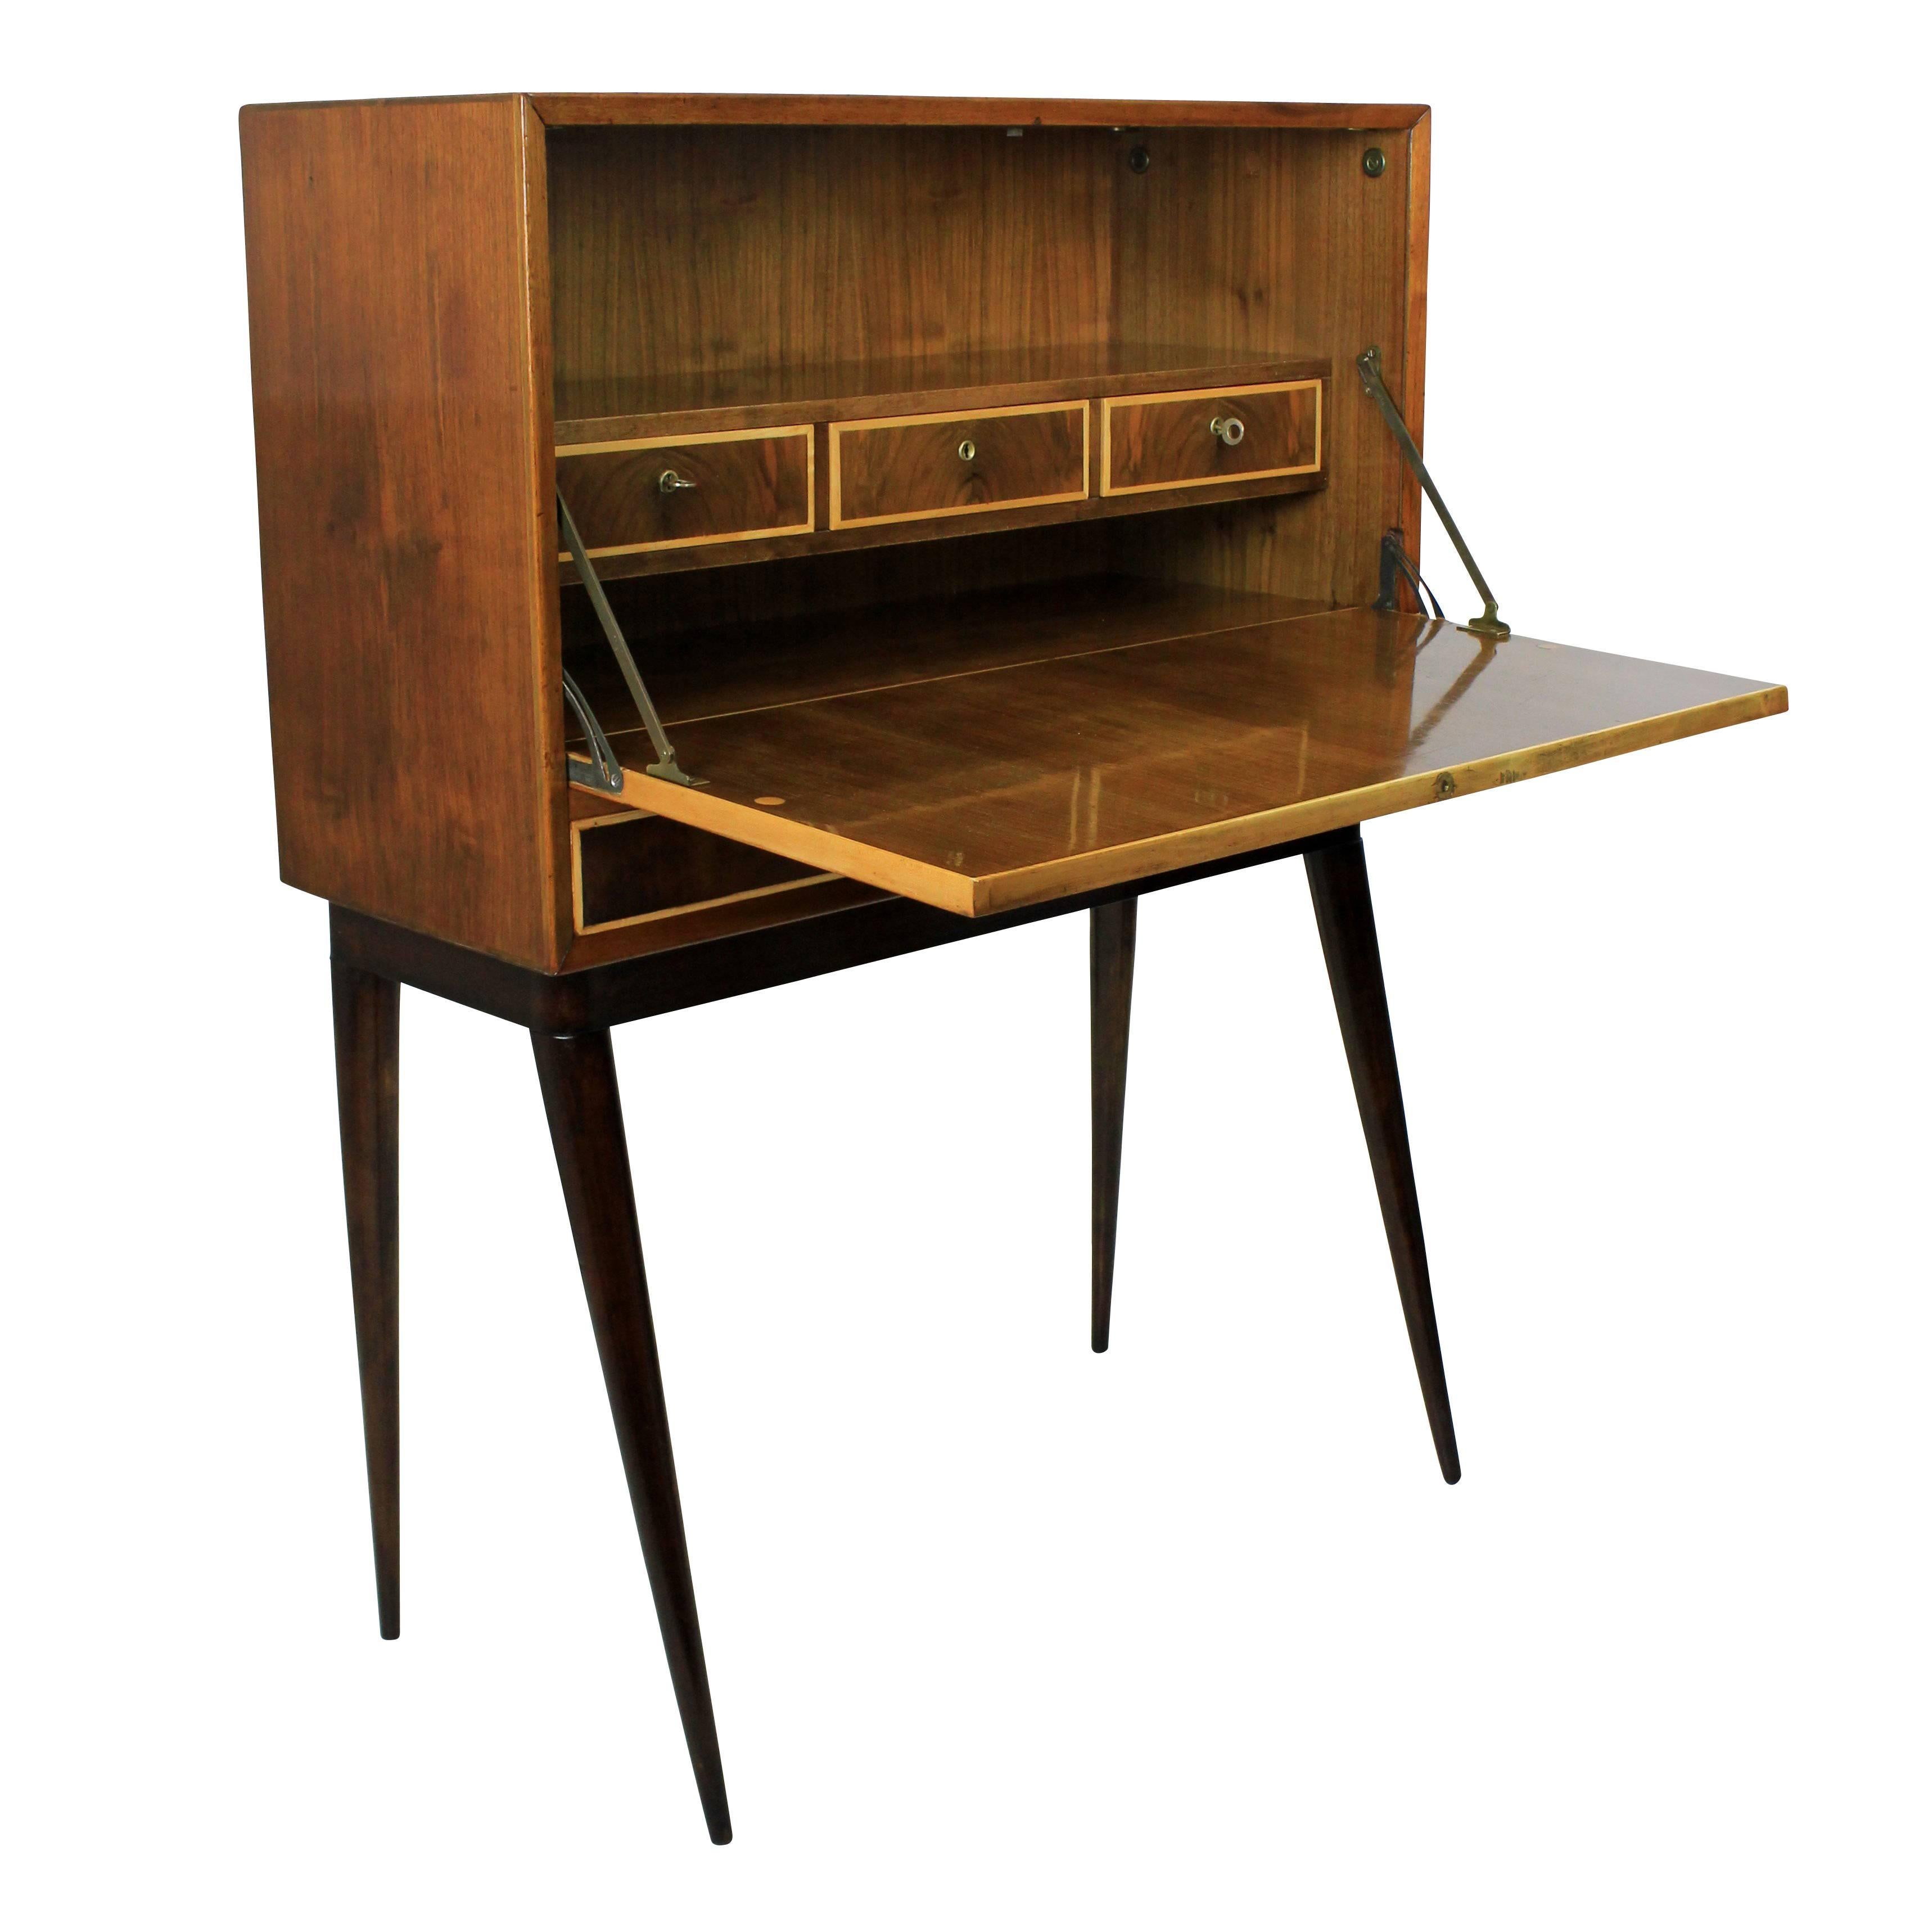 An Italian cabinet of stylish design, with a fall front with drawers inside and two drawers beneath: all with their own key.